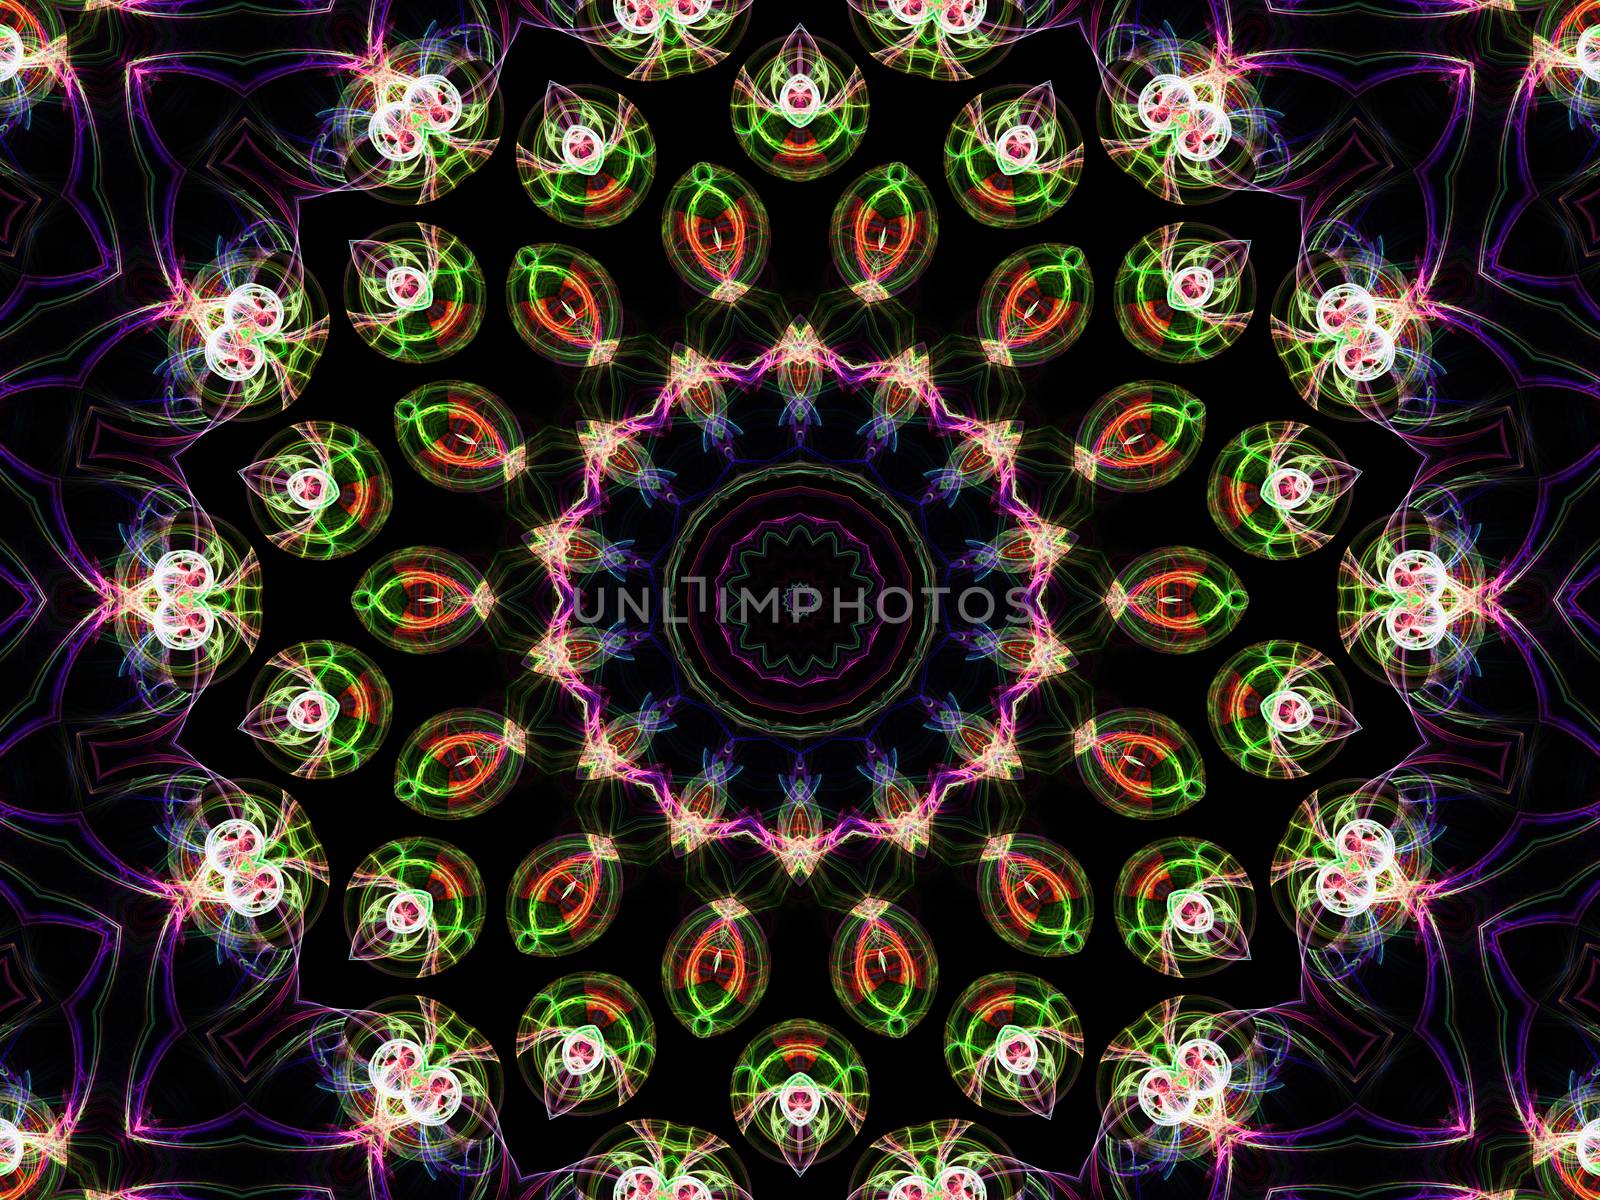 This image was created using fractal generating and graphic manipulation software.